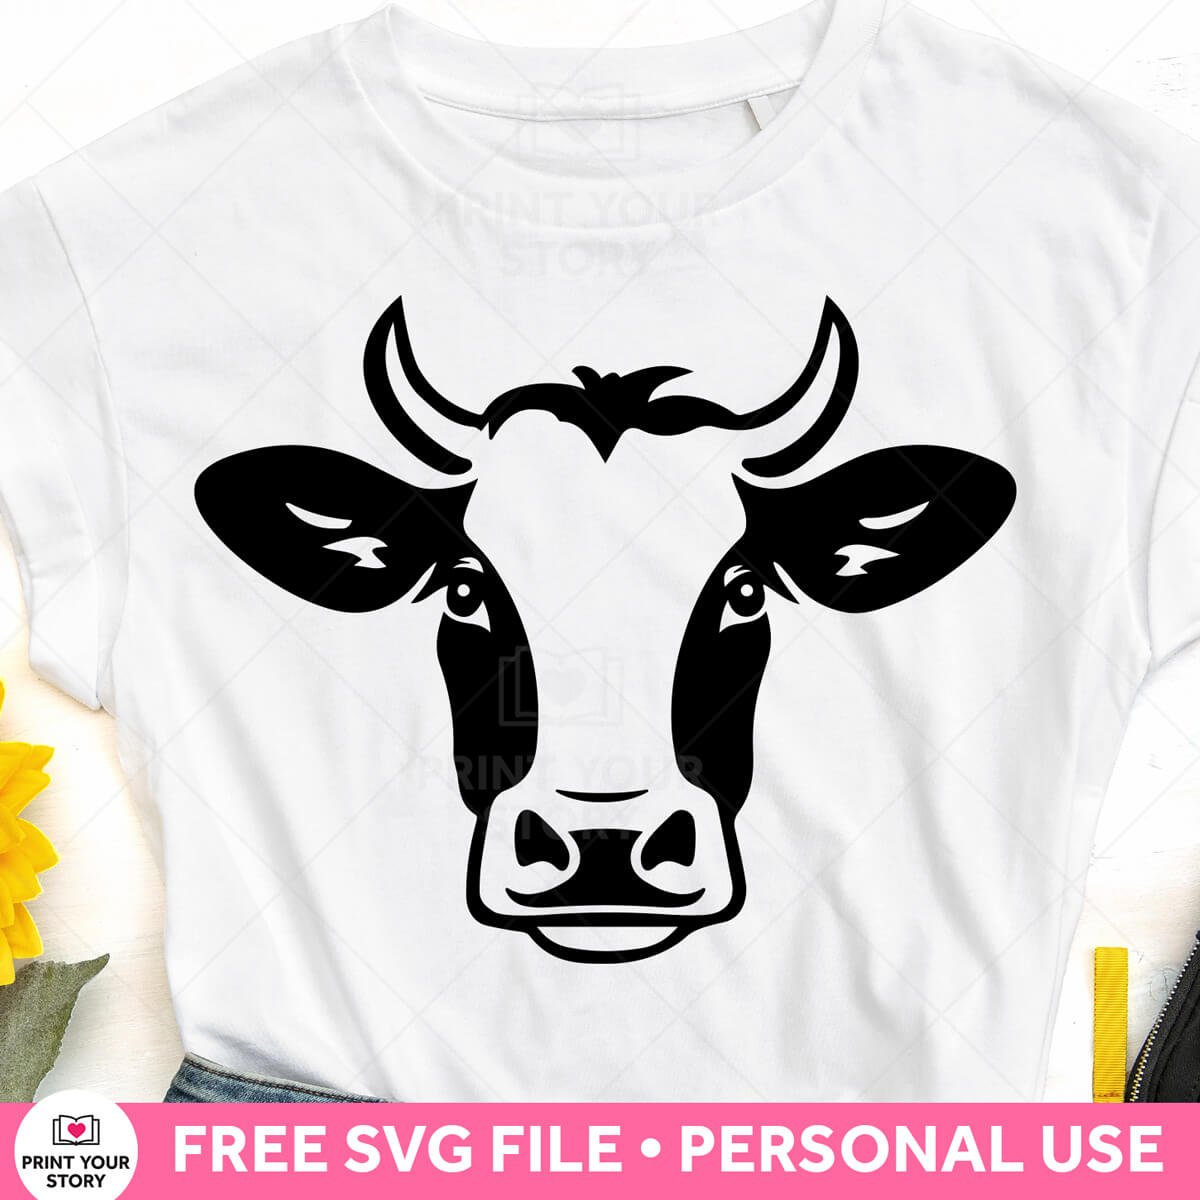 Free Cow Head SVG file for Cricut – Personal Use